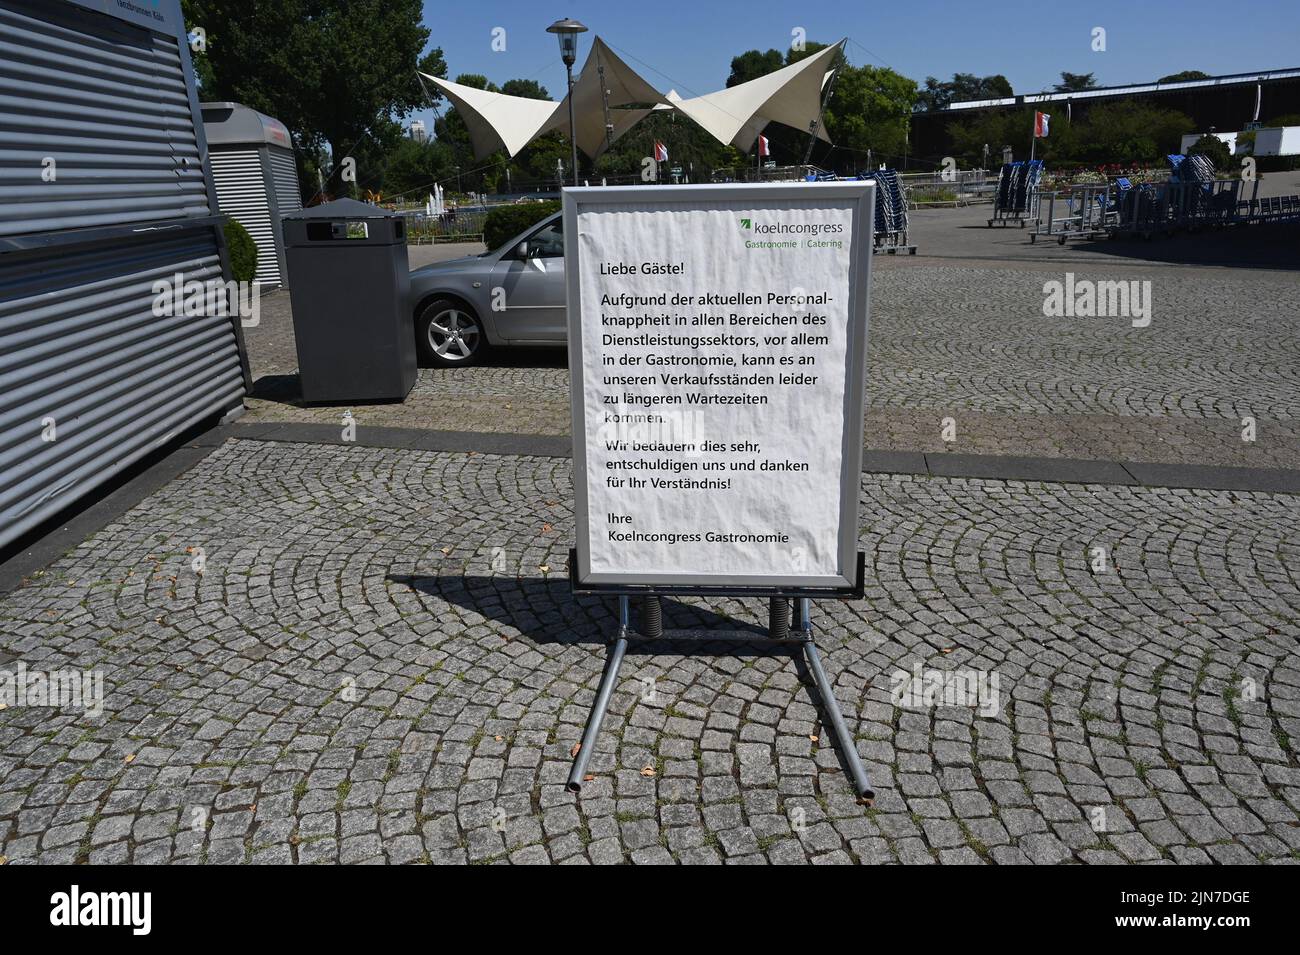 Cologne, Germany. 09th Aug, 2022. A sign at the open air location Cologne Tanzbrunnen indicates that there may be longer waiting times due to staff shortages and staff shortages in the service sector. Credit: Horst Galuschka/dpa/Horst Galuschka dpa/Alamy Live News Stock Photo